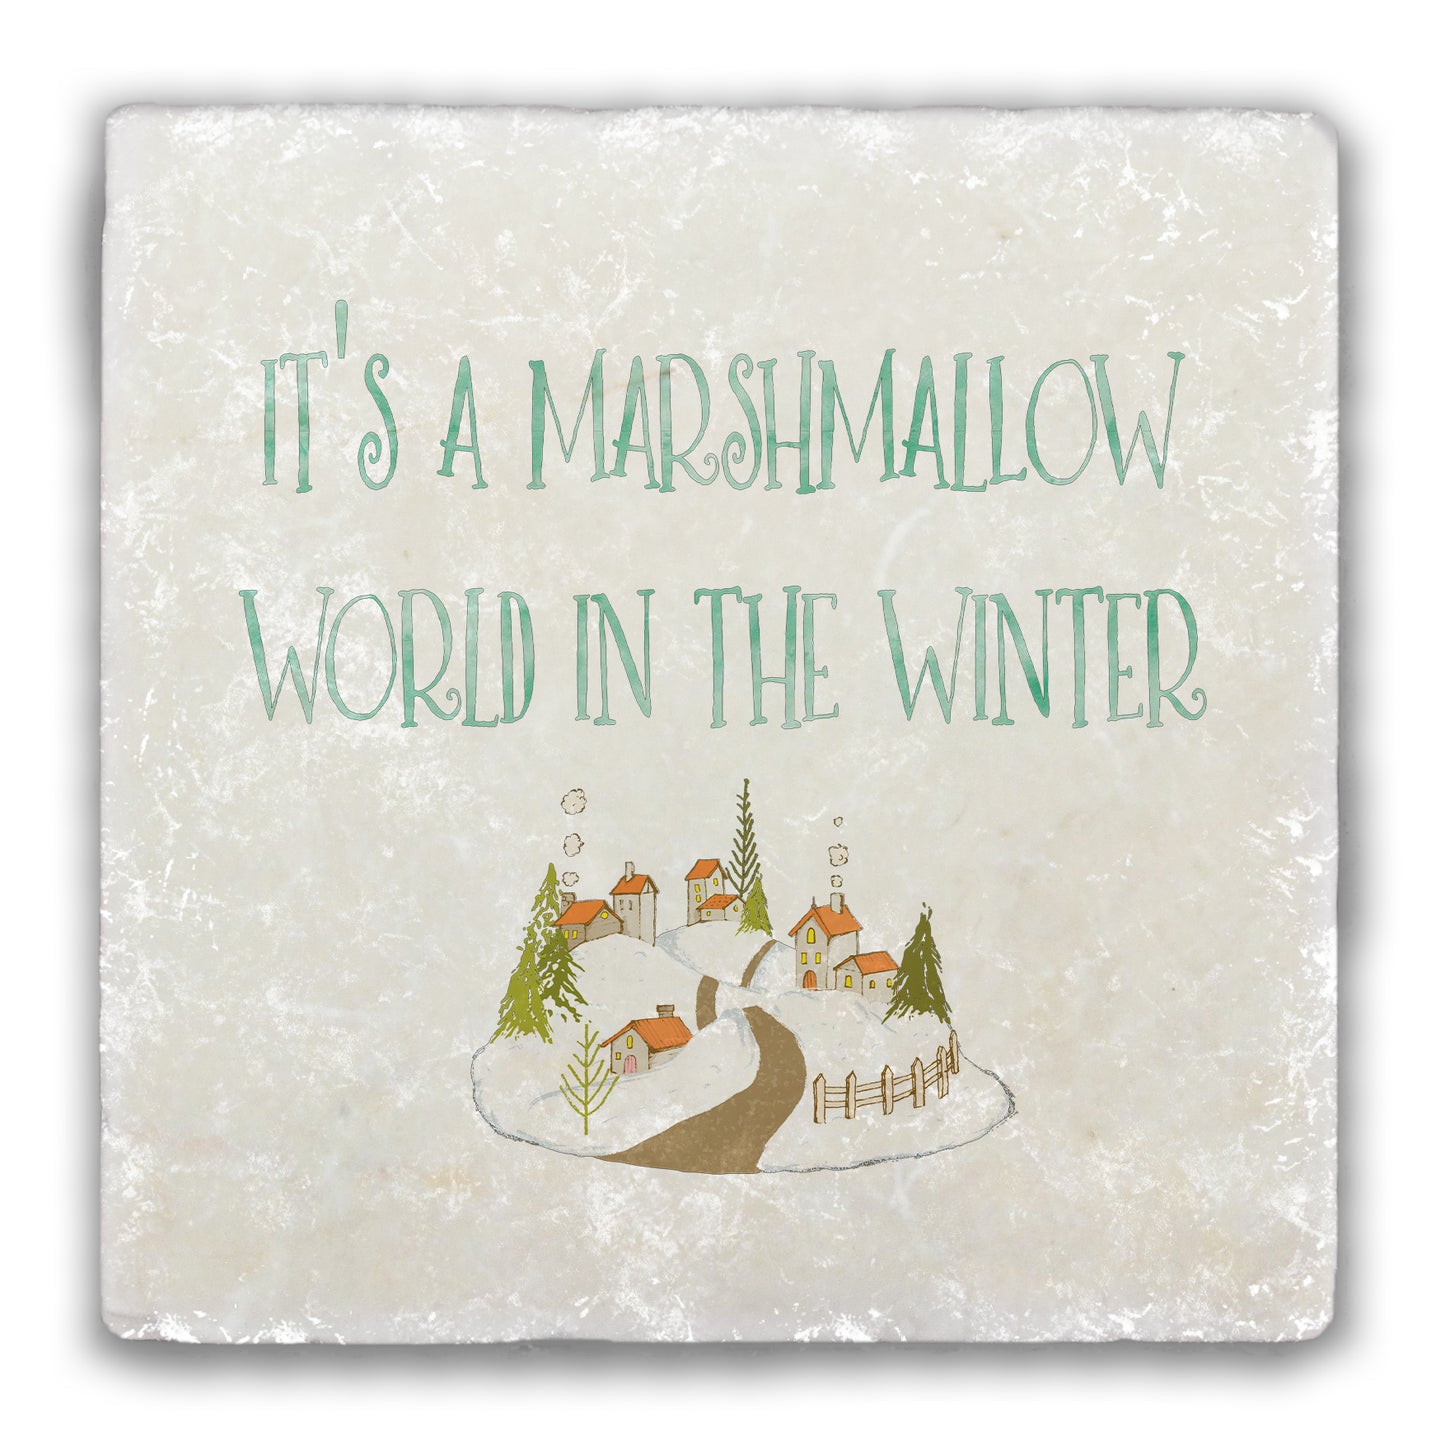 It's a Marshmallow World in the Winter Tumbled Stone Coaster